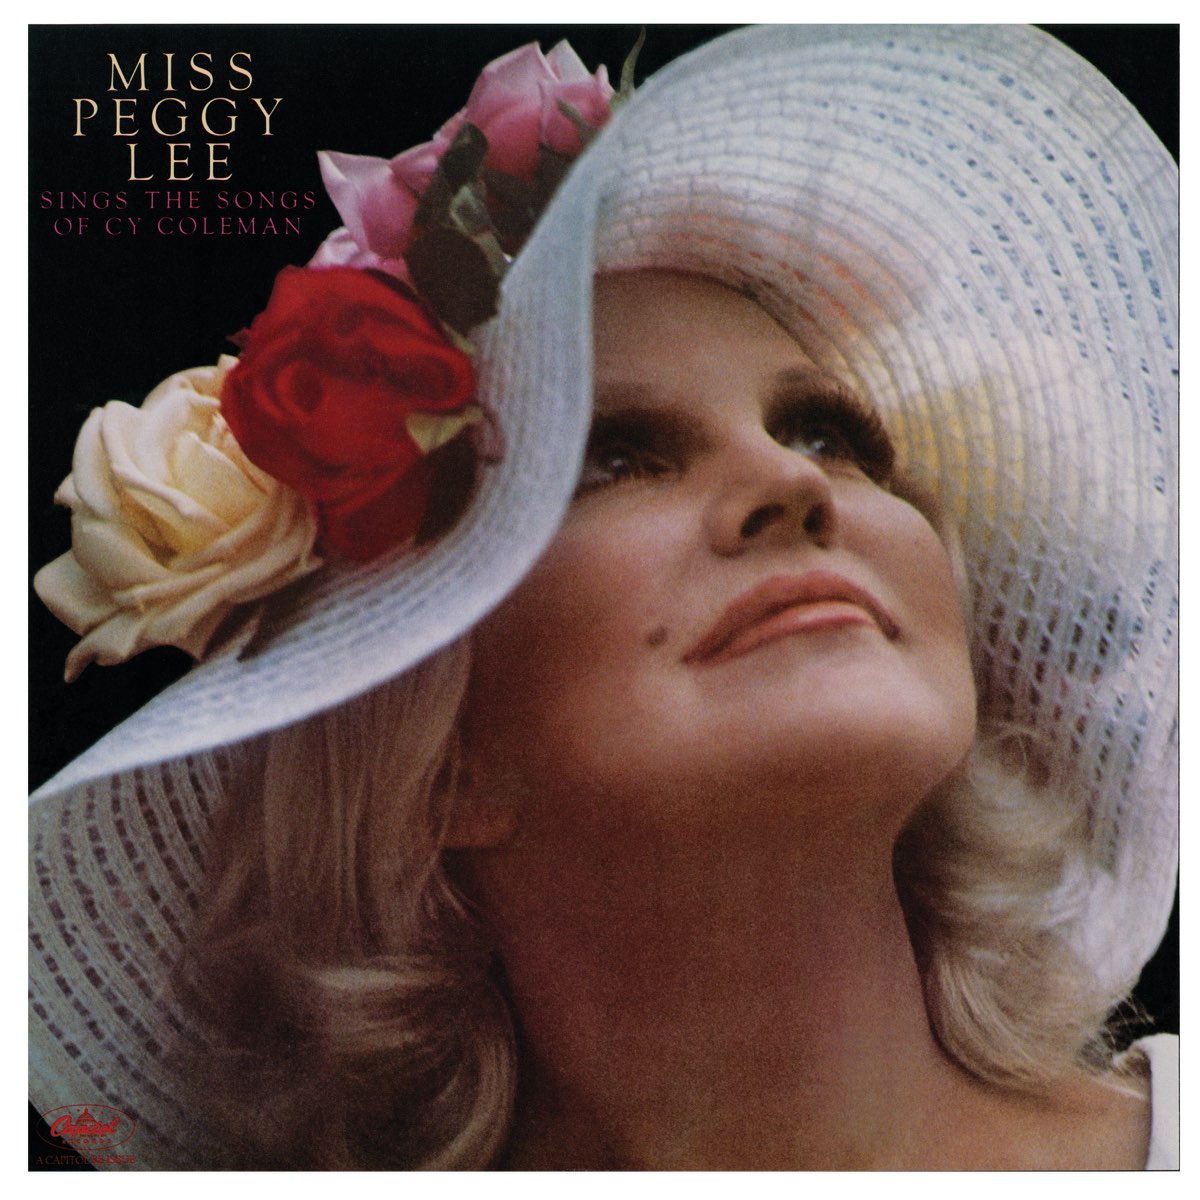 Miss Peggy Lee Sings the Songs of Cy Coleman (Expanded Edition) by Peggy Lee  on Apple Music